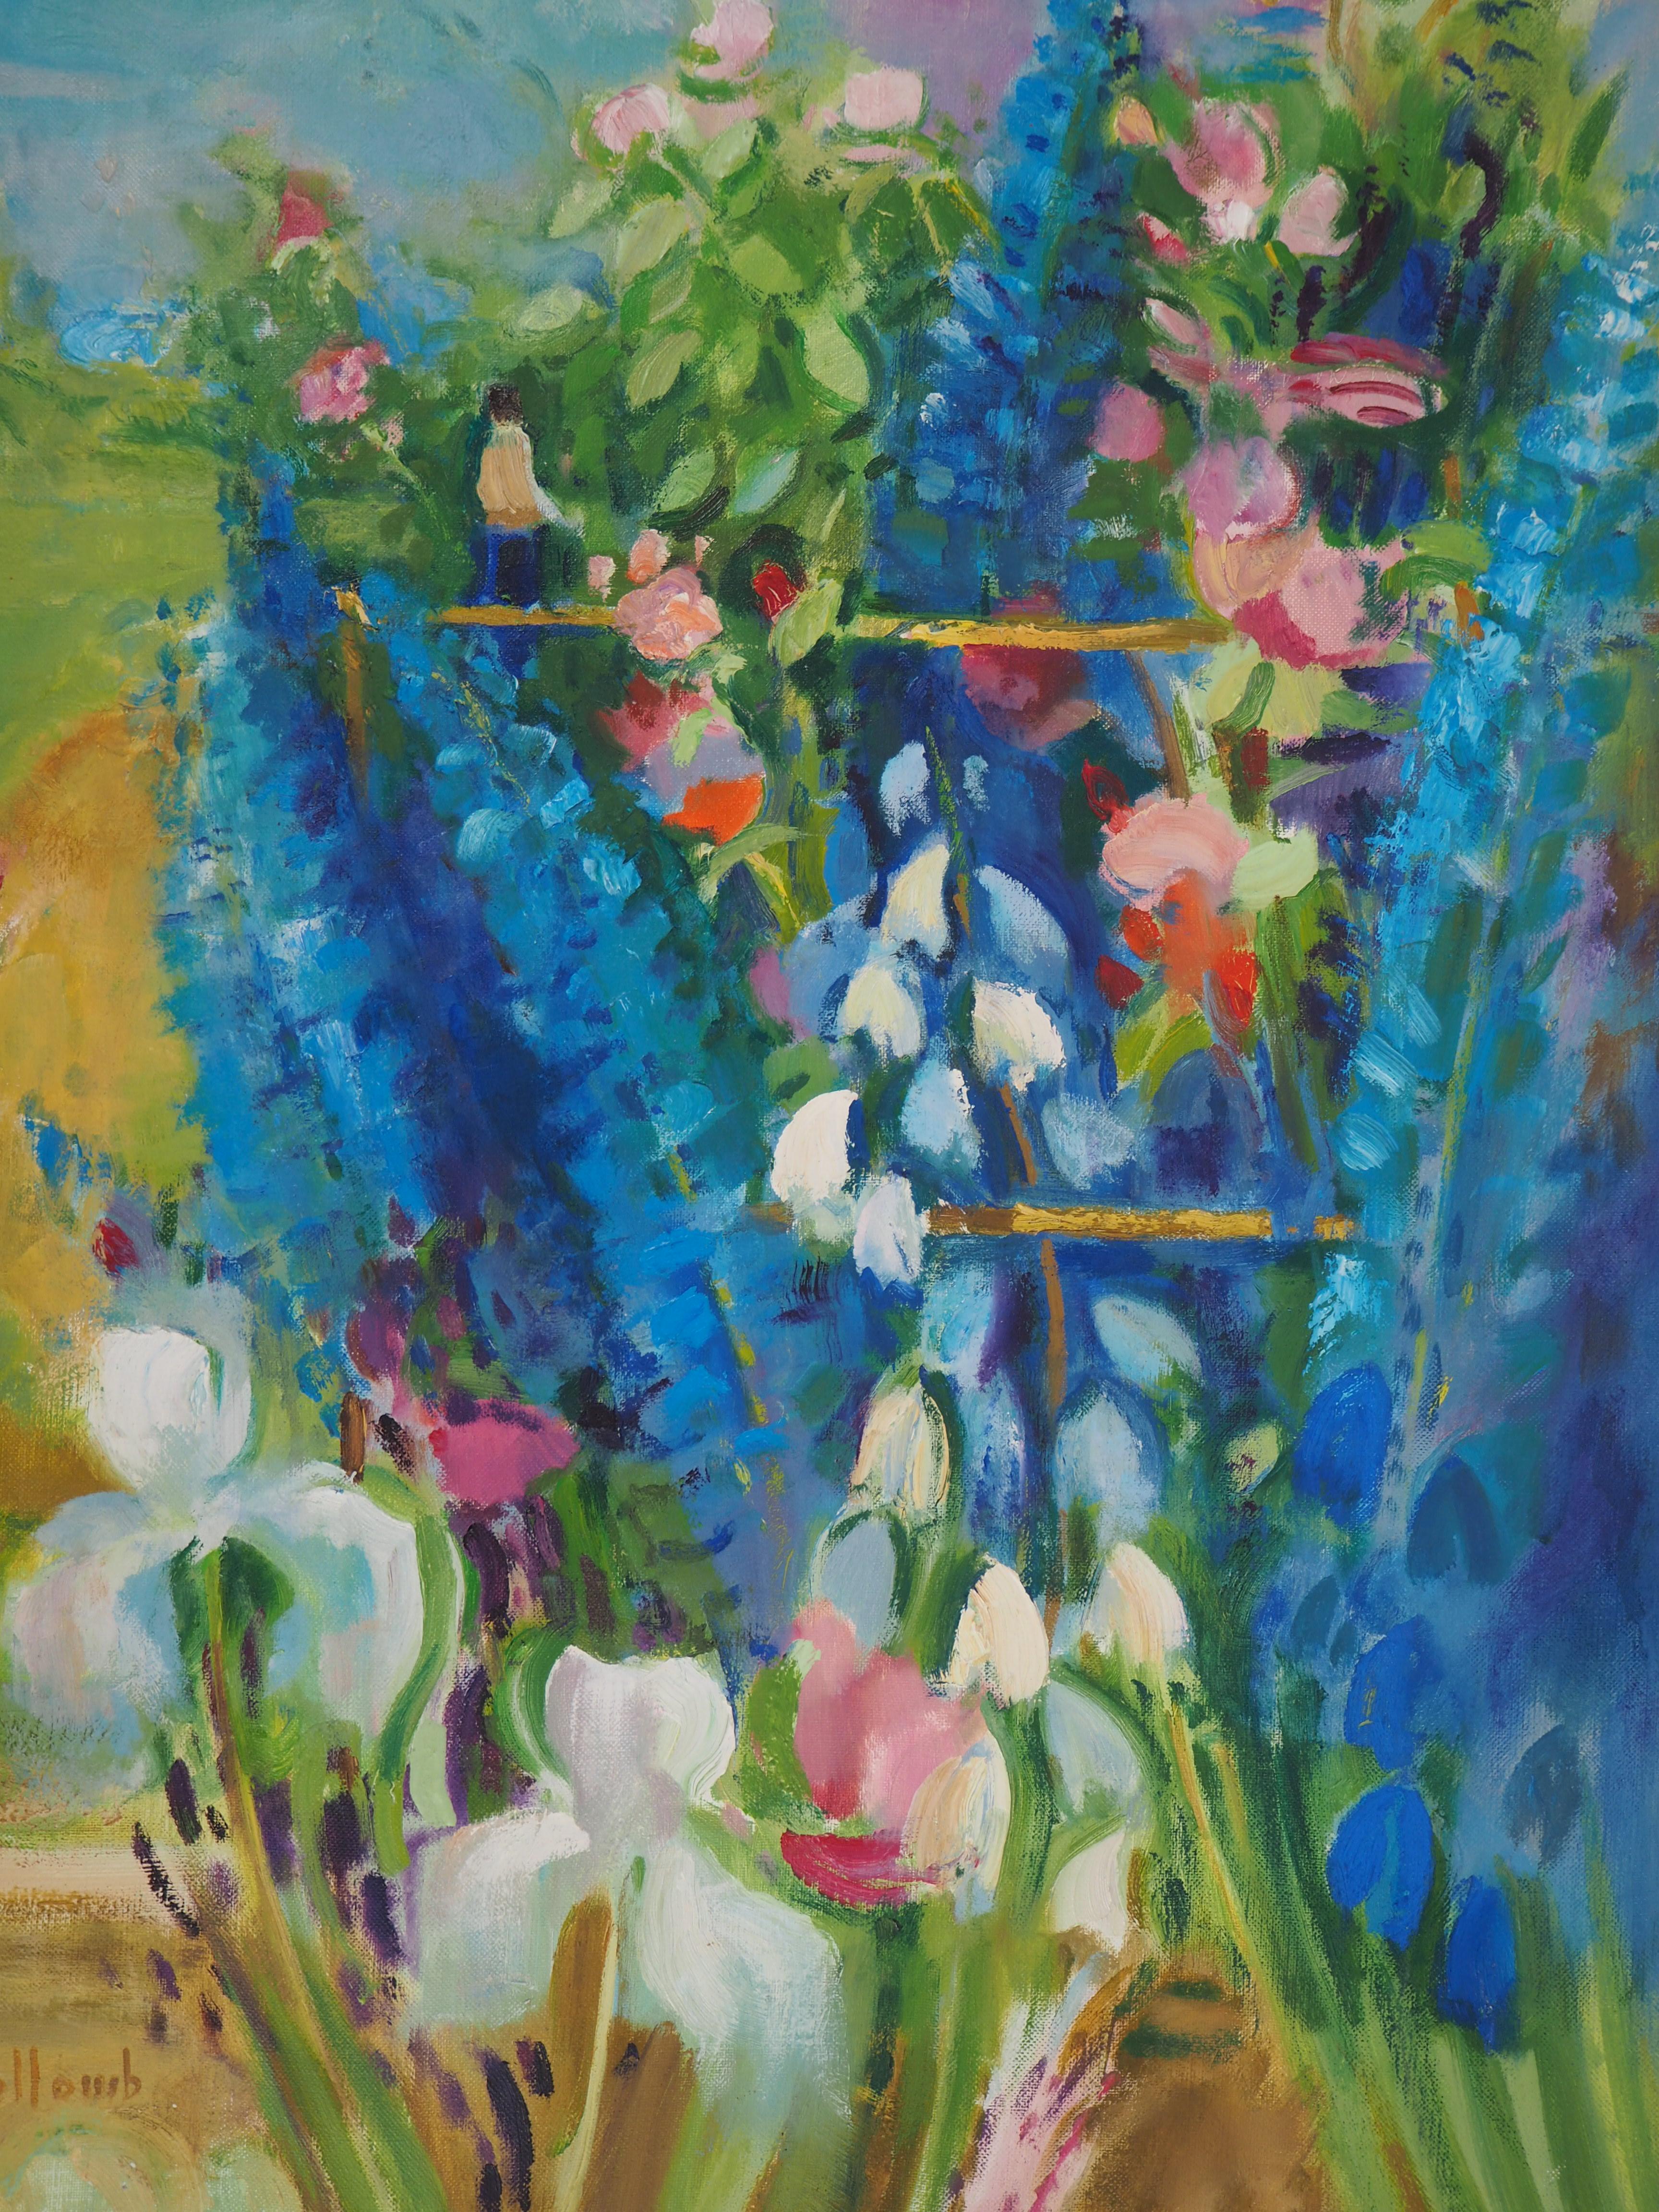 Paul Collomb
Garden : White Irises and Delphiniums 

Original Oil painting on canvas
Handsigned bottom left
Titled on the back
On Canvas 61 x 50 cm (c. 24 x 20 in)

Excellent condition